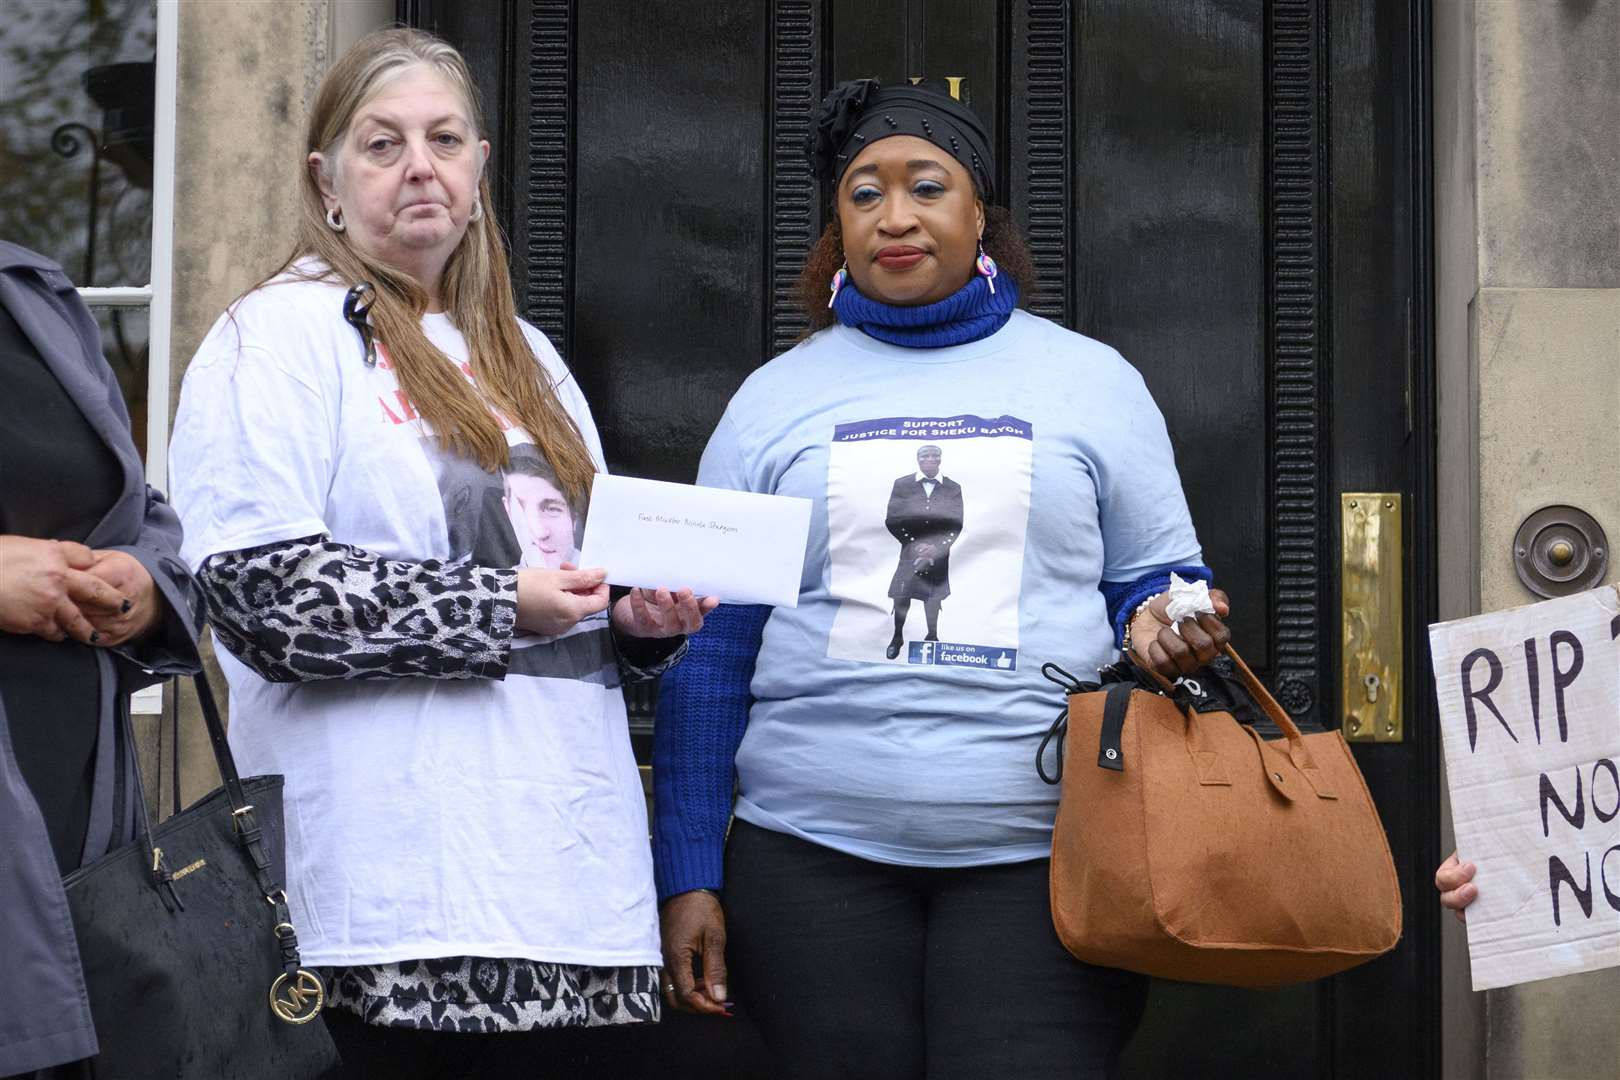 Allan Marshall’s aunt Sharon MacFadyen (left) delivering a letter to Bute House last year with fellow campaigner Kosna Bayoh, sister of Sheku Bayoh, who died after being restrained by police (John Linton/PA)